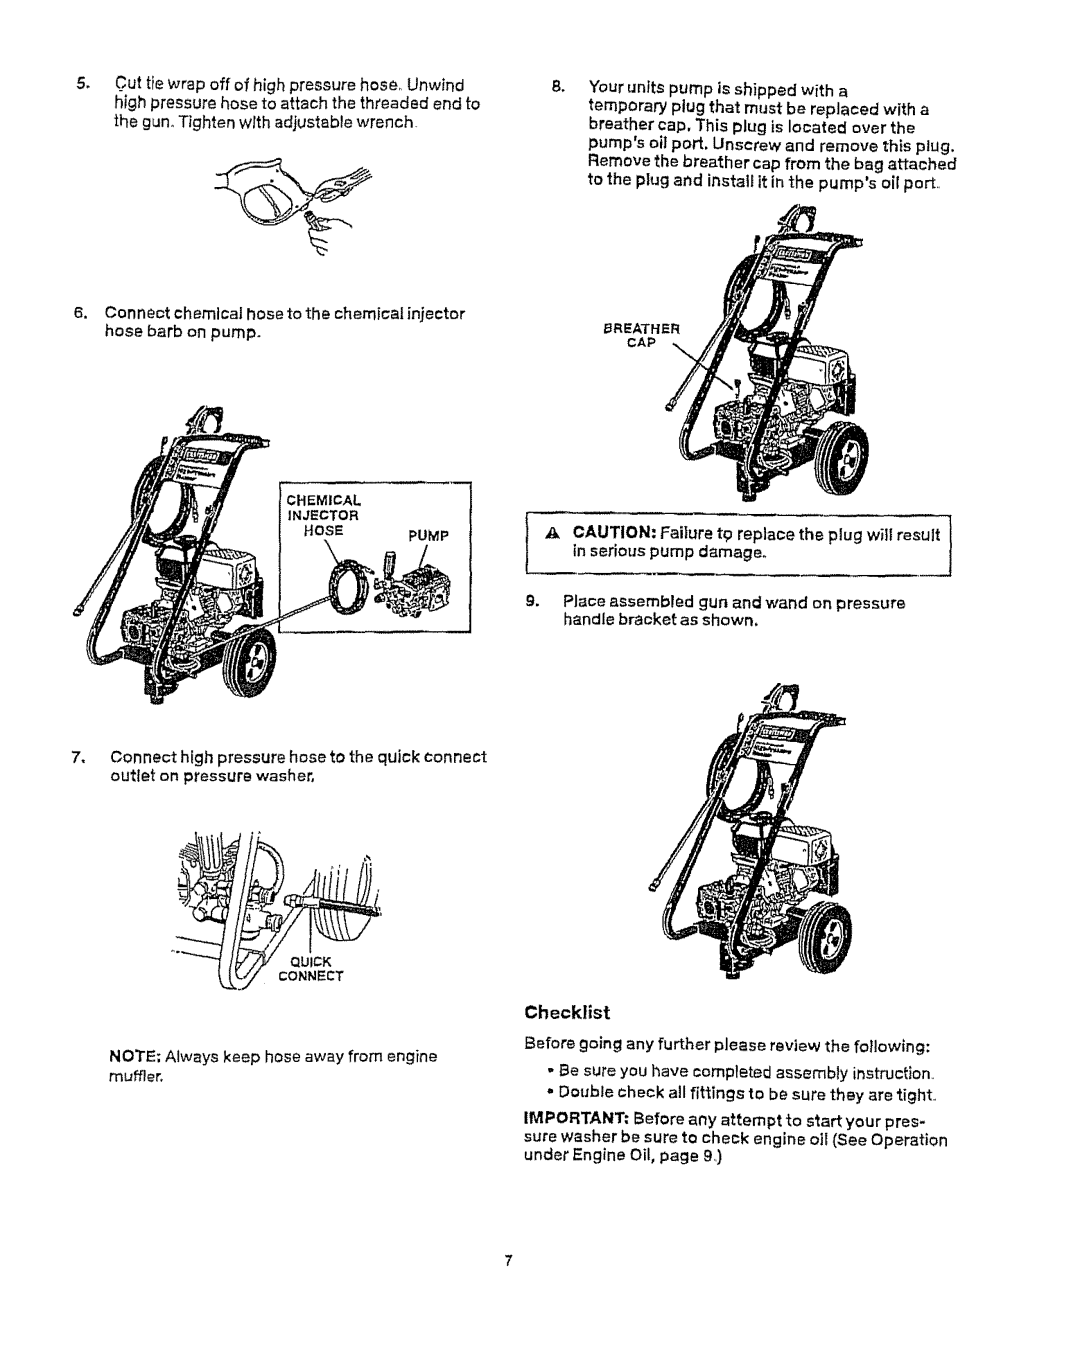 Craftsman 919.76902 manual AUTION: Failure t_-replace the plug will result, Checklist 